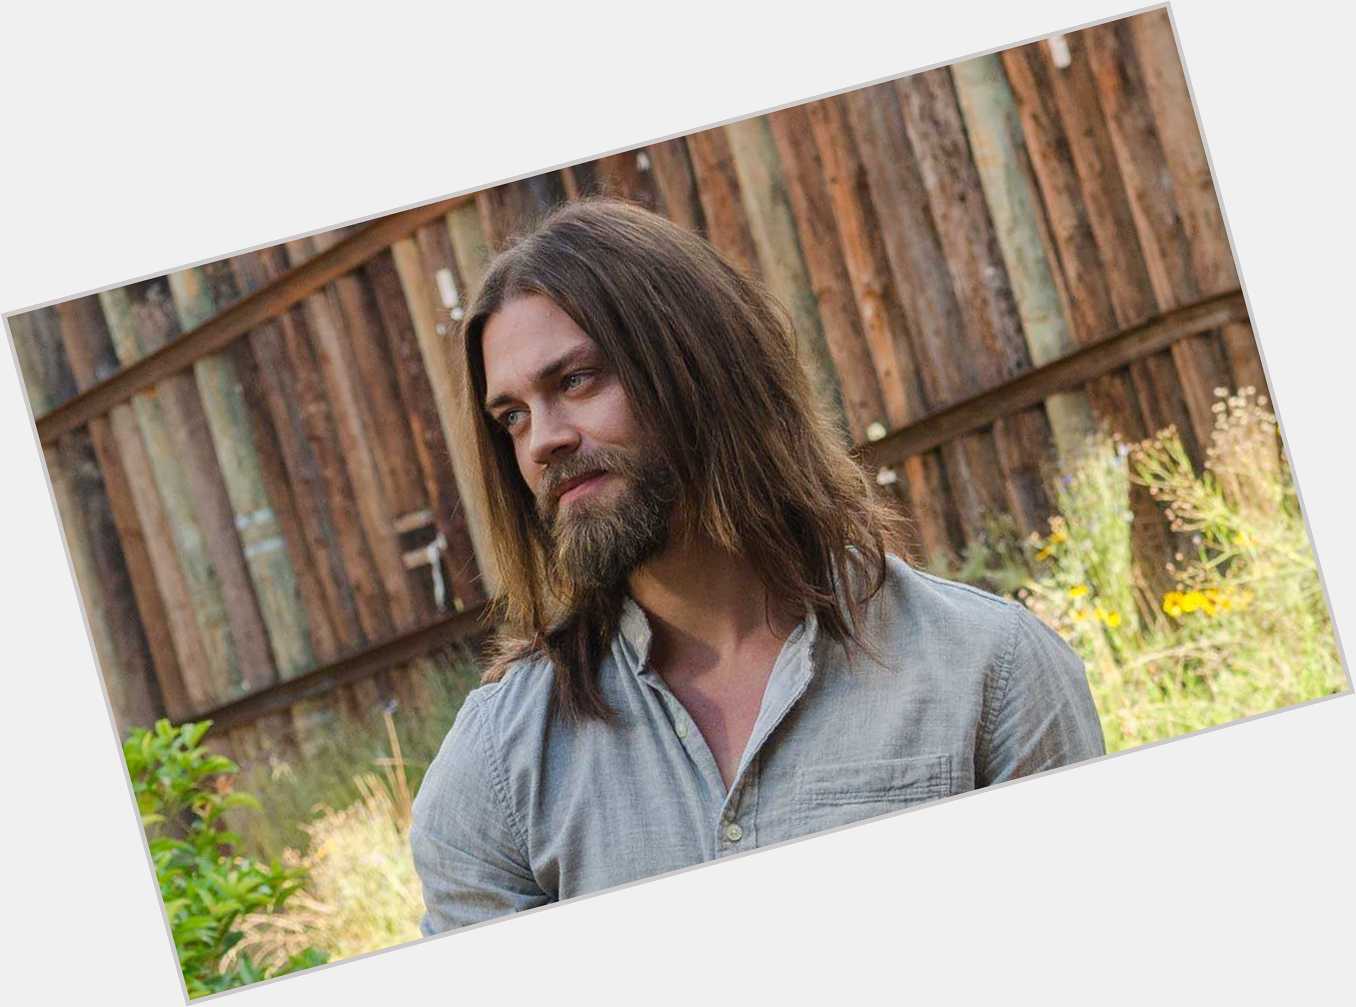 Happy 37th birthday to THE WALKING DEAD\s Tom Payne!

I guess Jesus has two birthdays this month... 